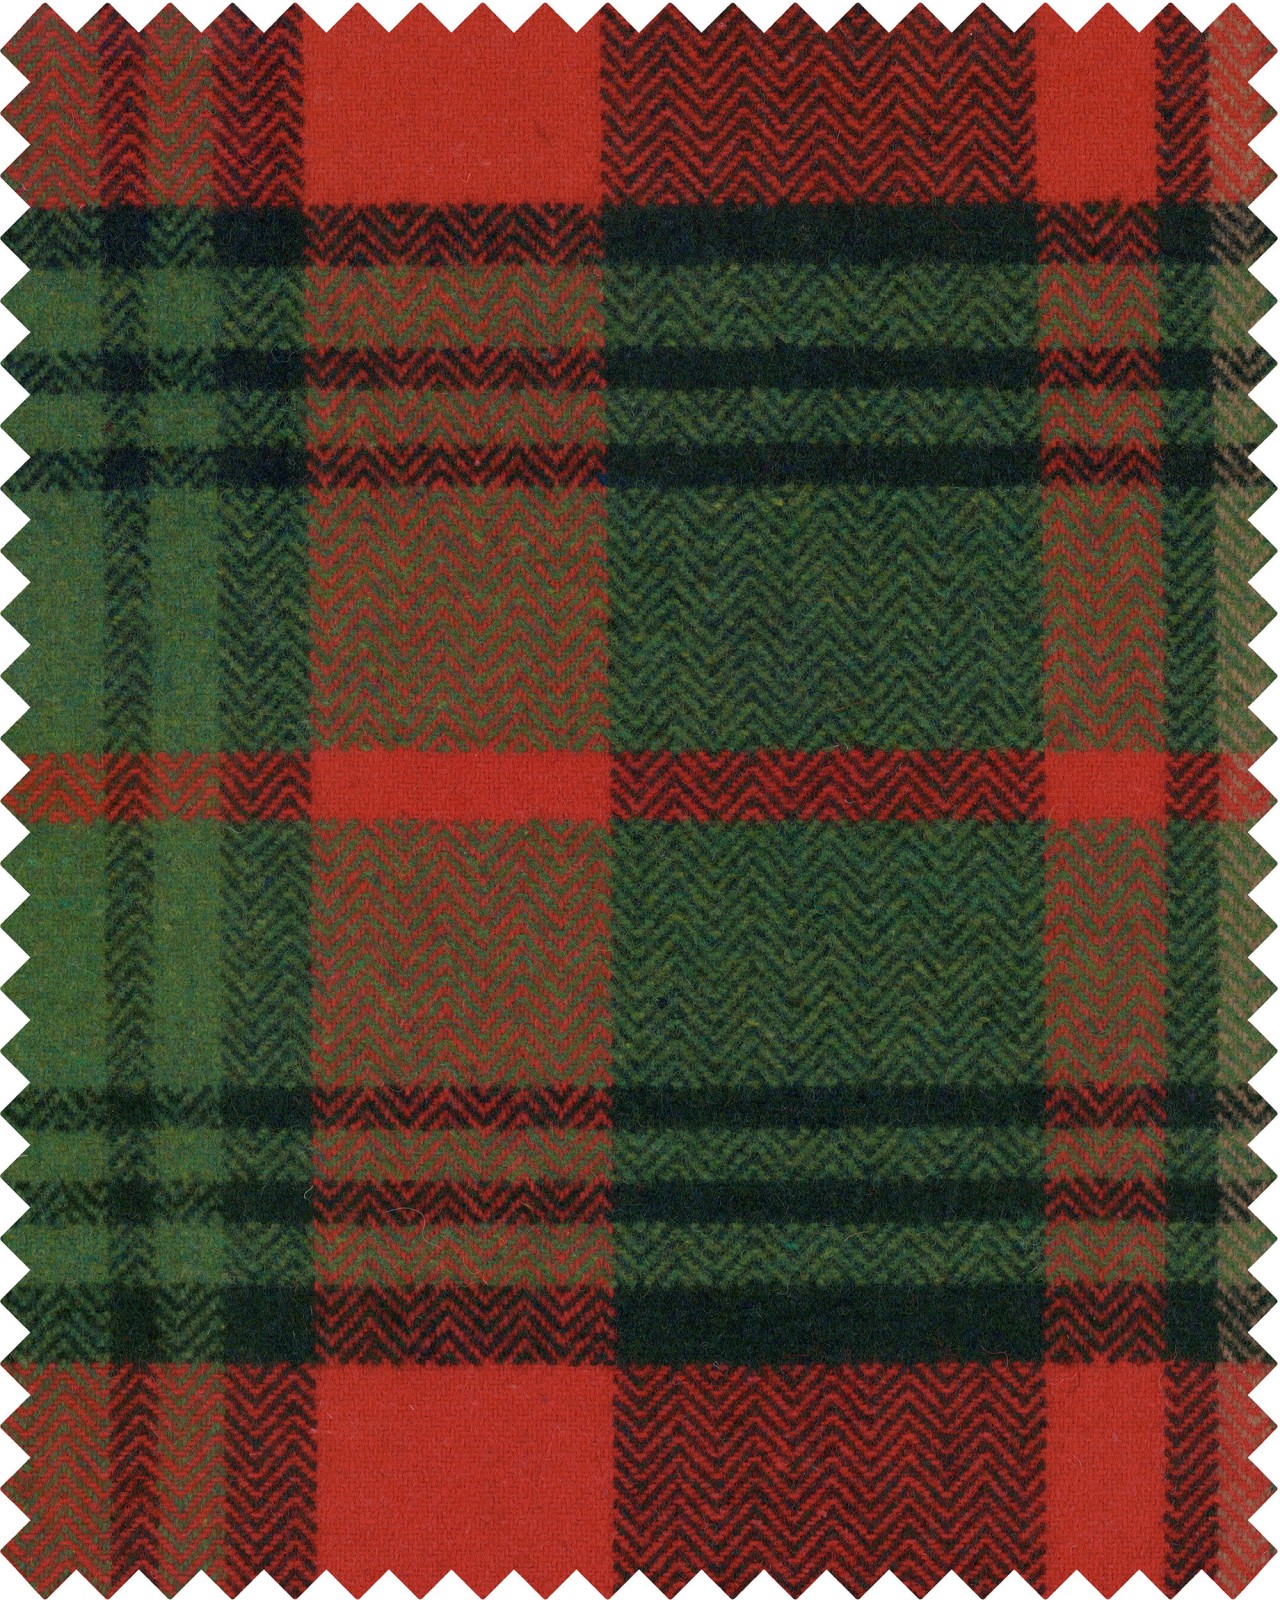 TYROLEAN PLAID Woven Fabric